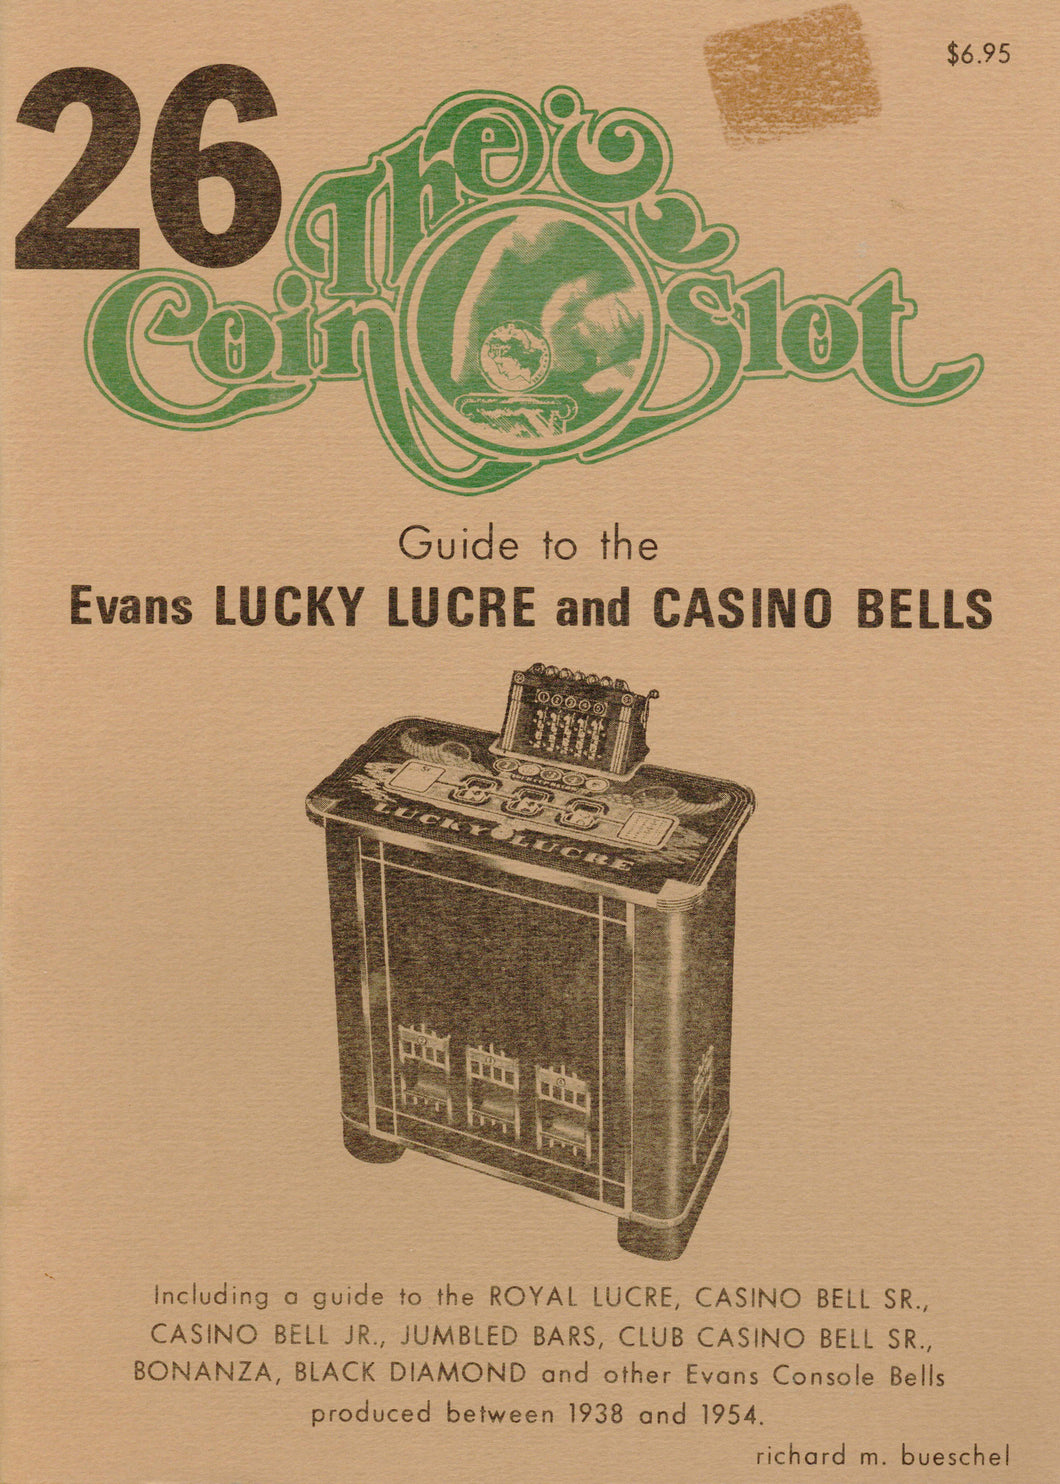 Coin Slot #26. Guide to the Evans Lucky Lucre and Casino Bells